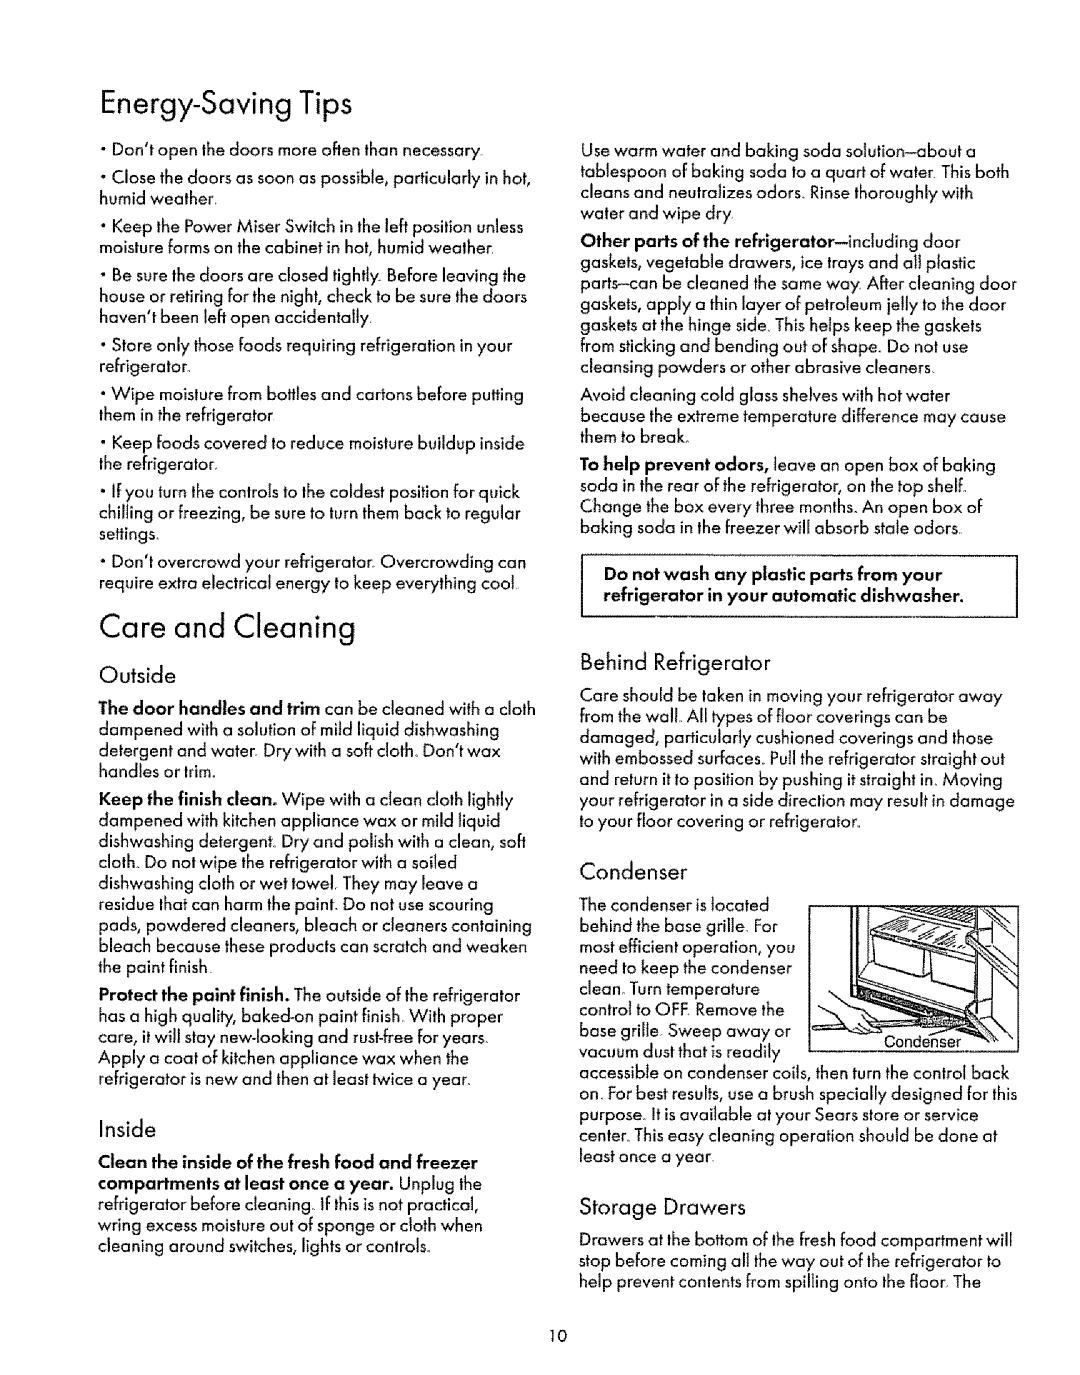 Kenmore 67871 manual Care and Cleaning, Energy-SavingTips, Outside, Inside, Behind Refrigerator, Condenser, Storage Drawers 